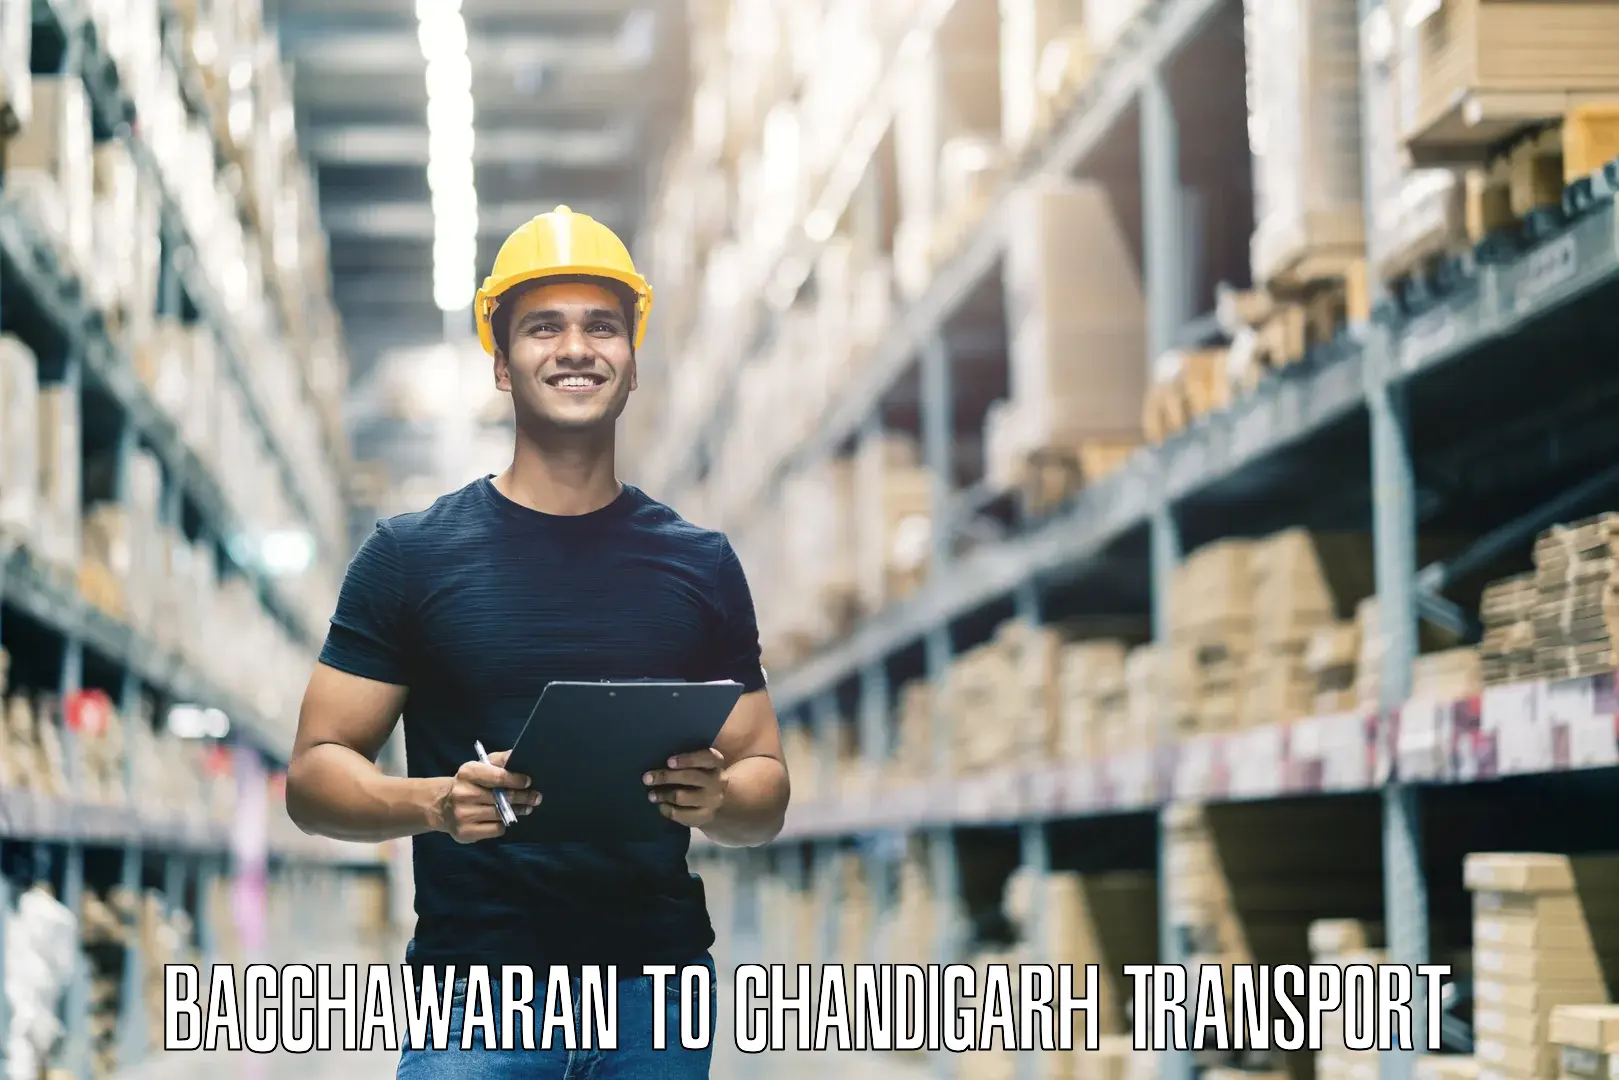 Domestic transport services Bacchawaran to Chandigarh